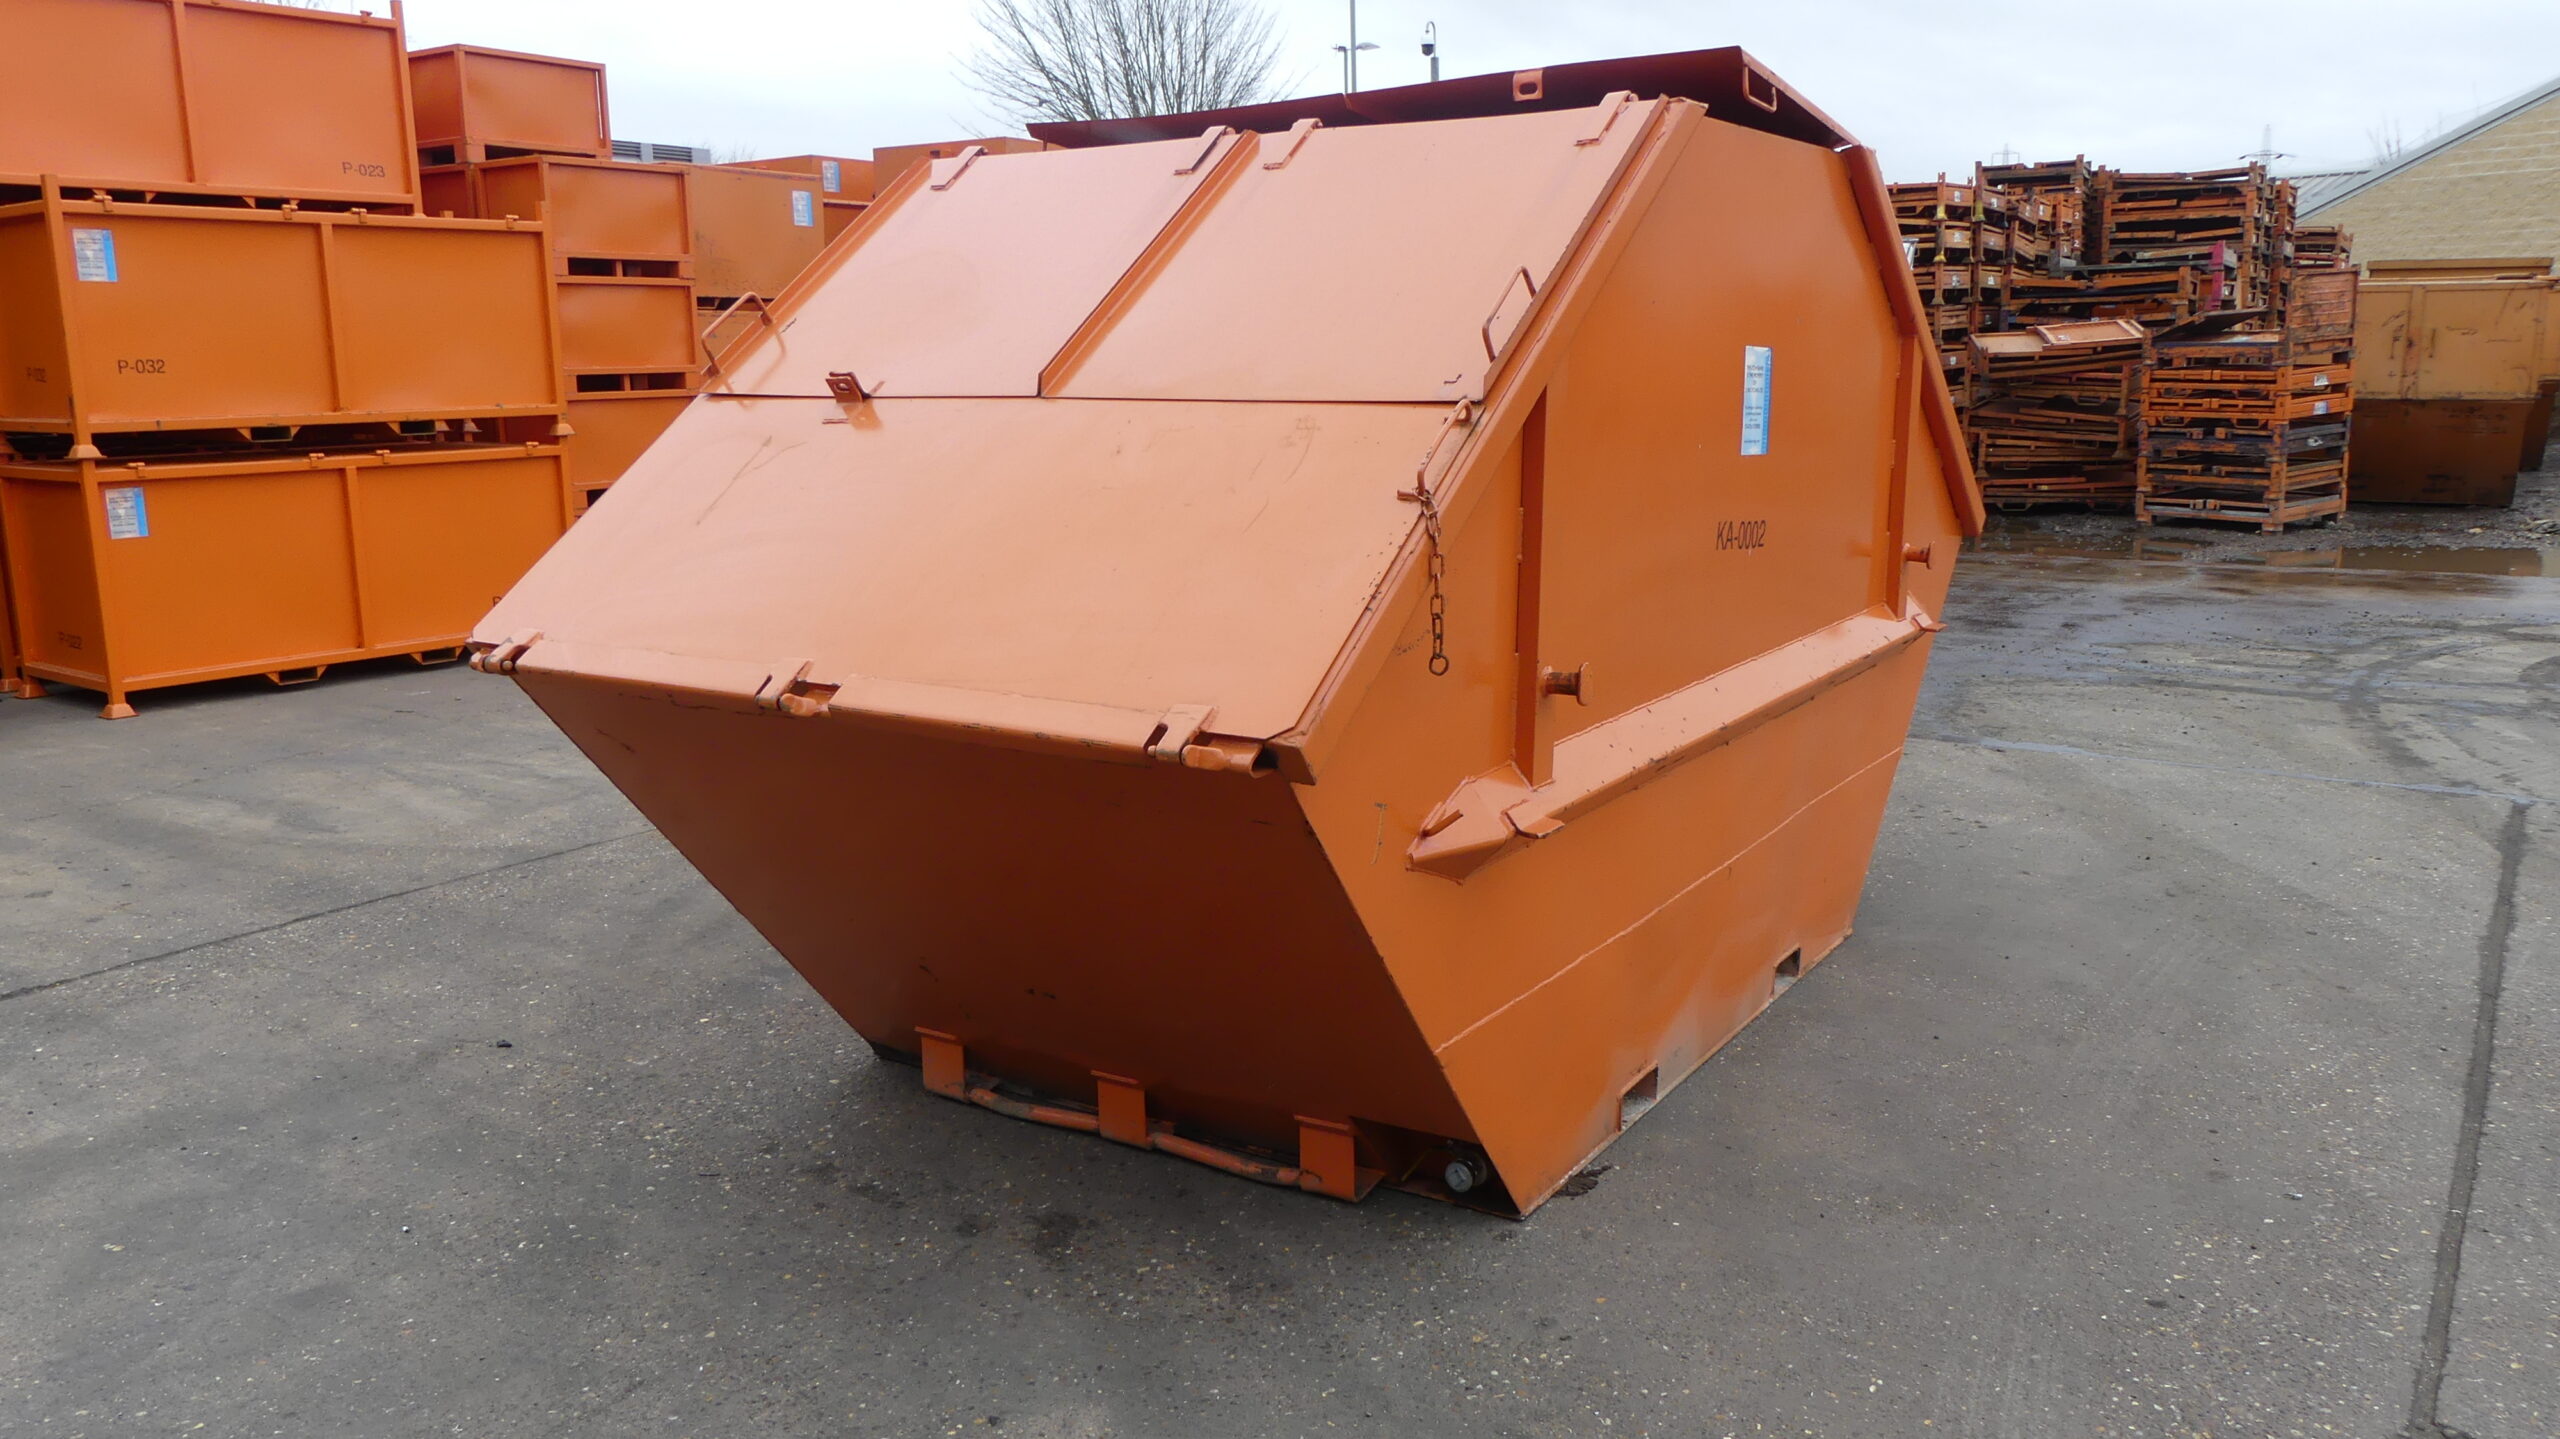 Lids of lockable skips safely opened at scrap metal recyclers